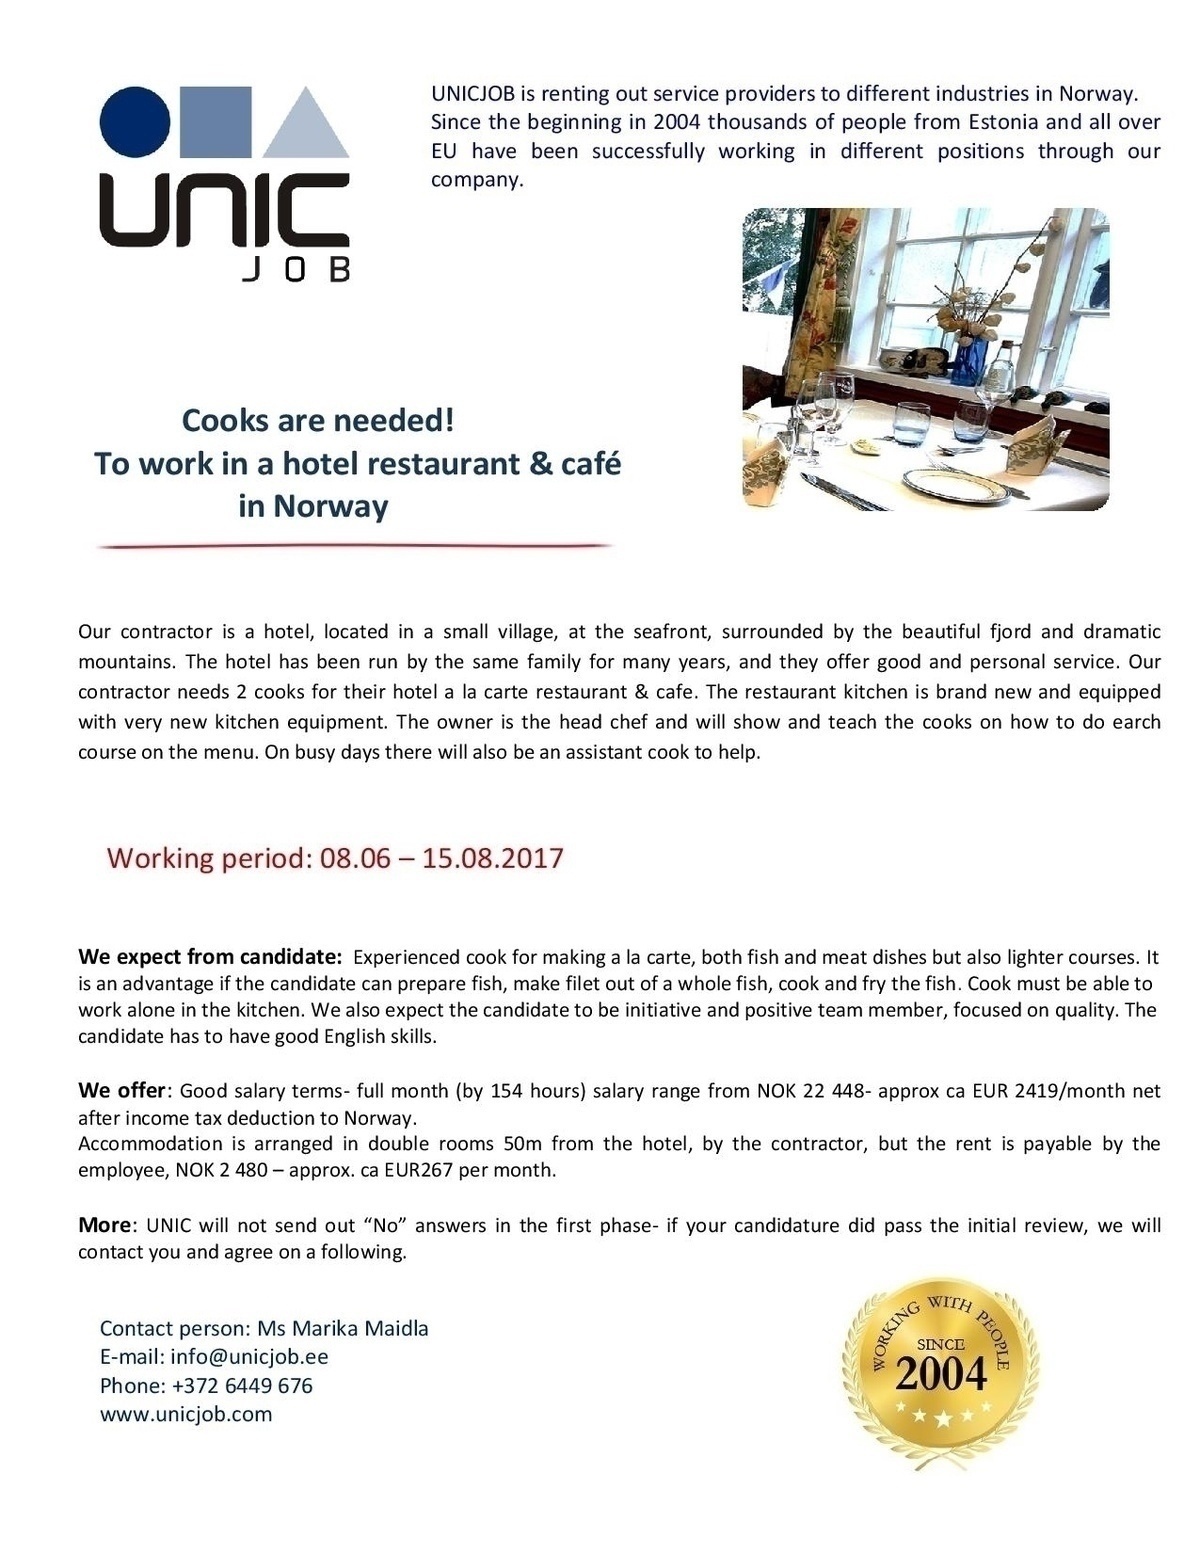 Unic Management OÜ 2 cooks to work in Norway 08.06 - 15.08.2017